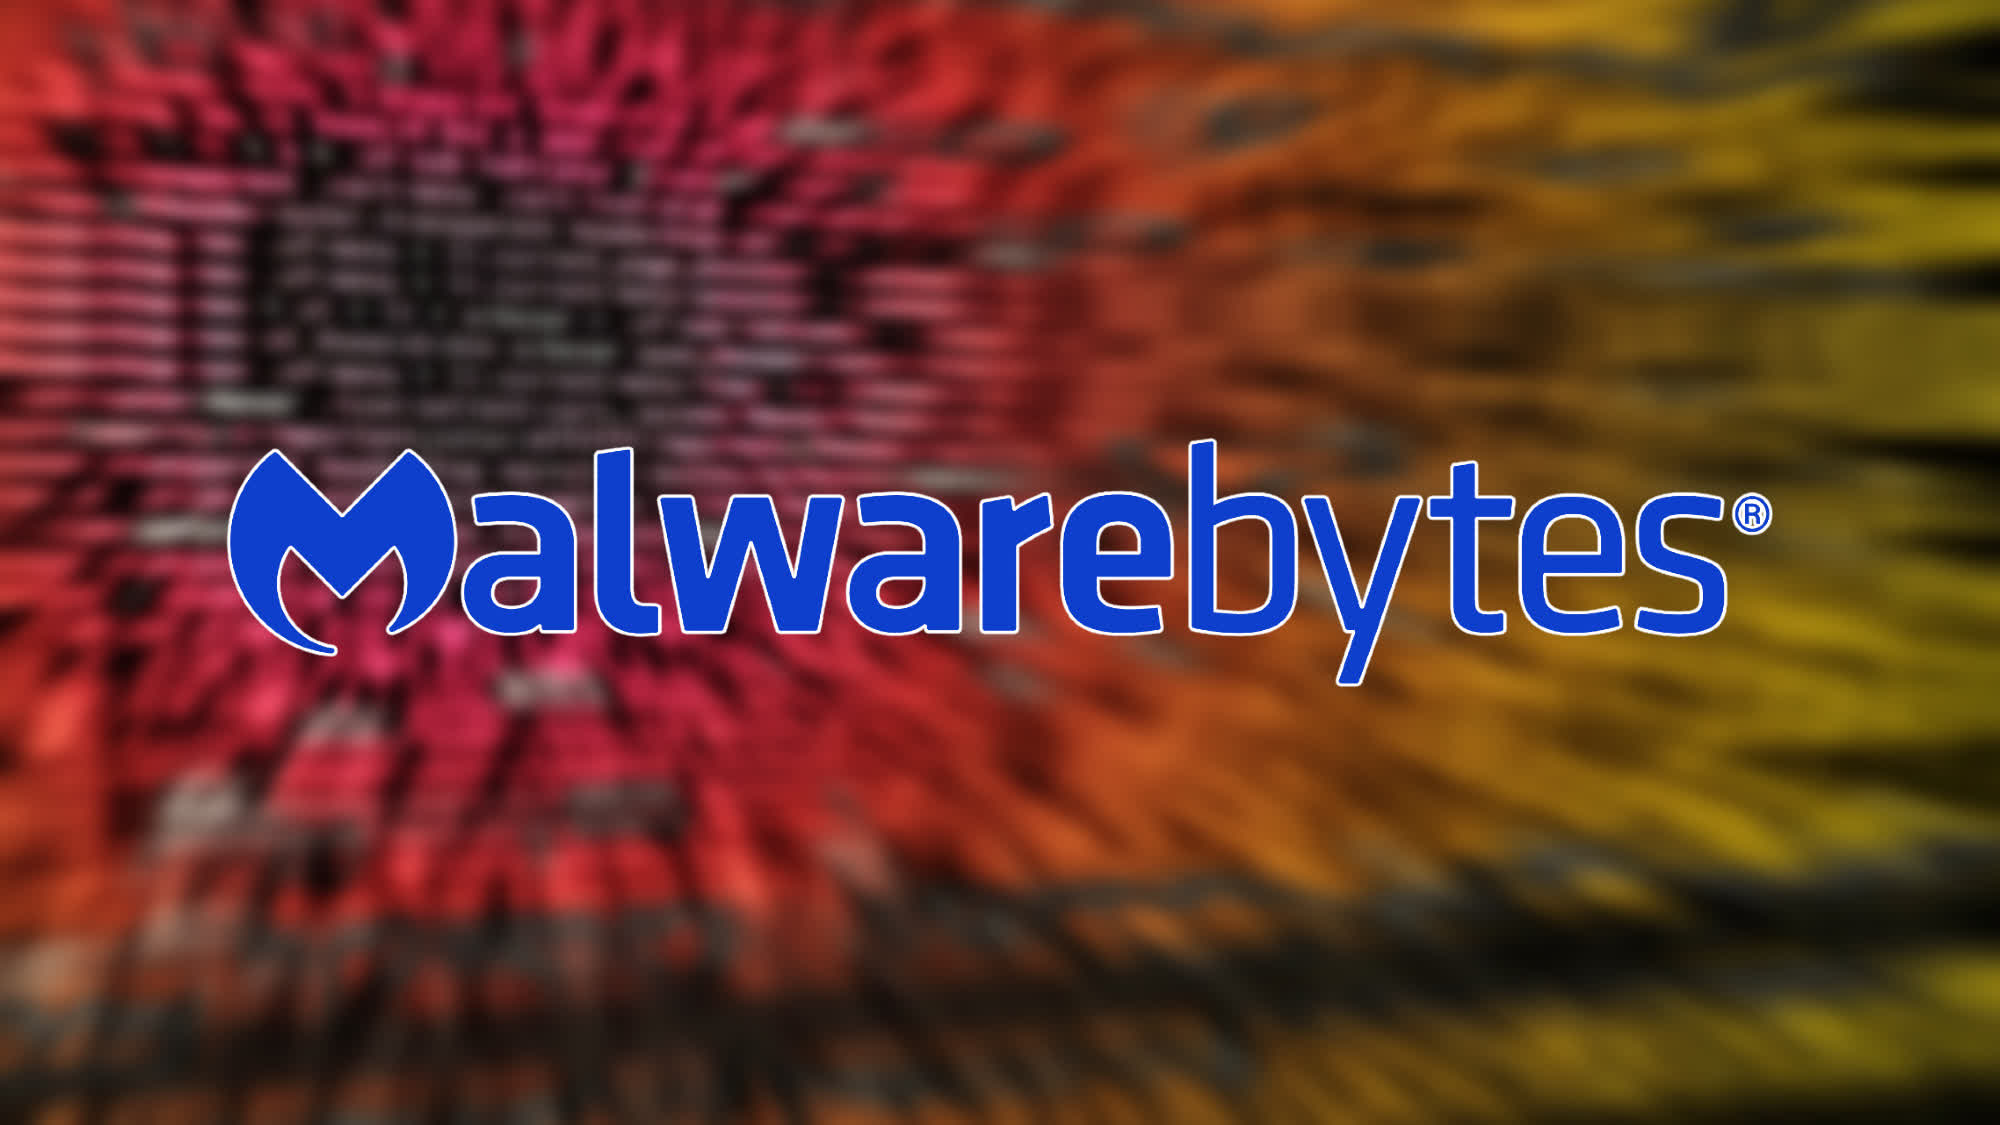 Malwarebytes faces lawsuit for classifying rival's anti-spyware program as a threat